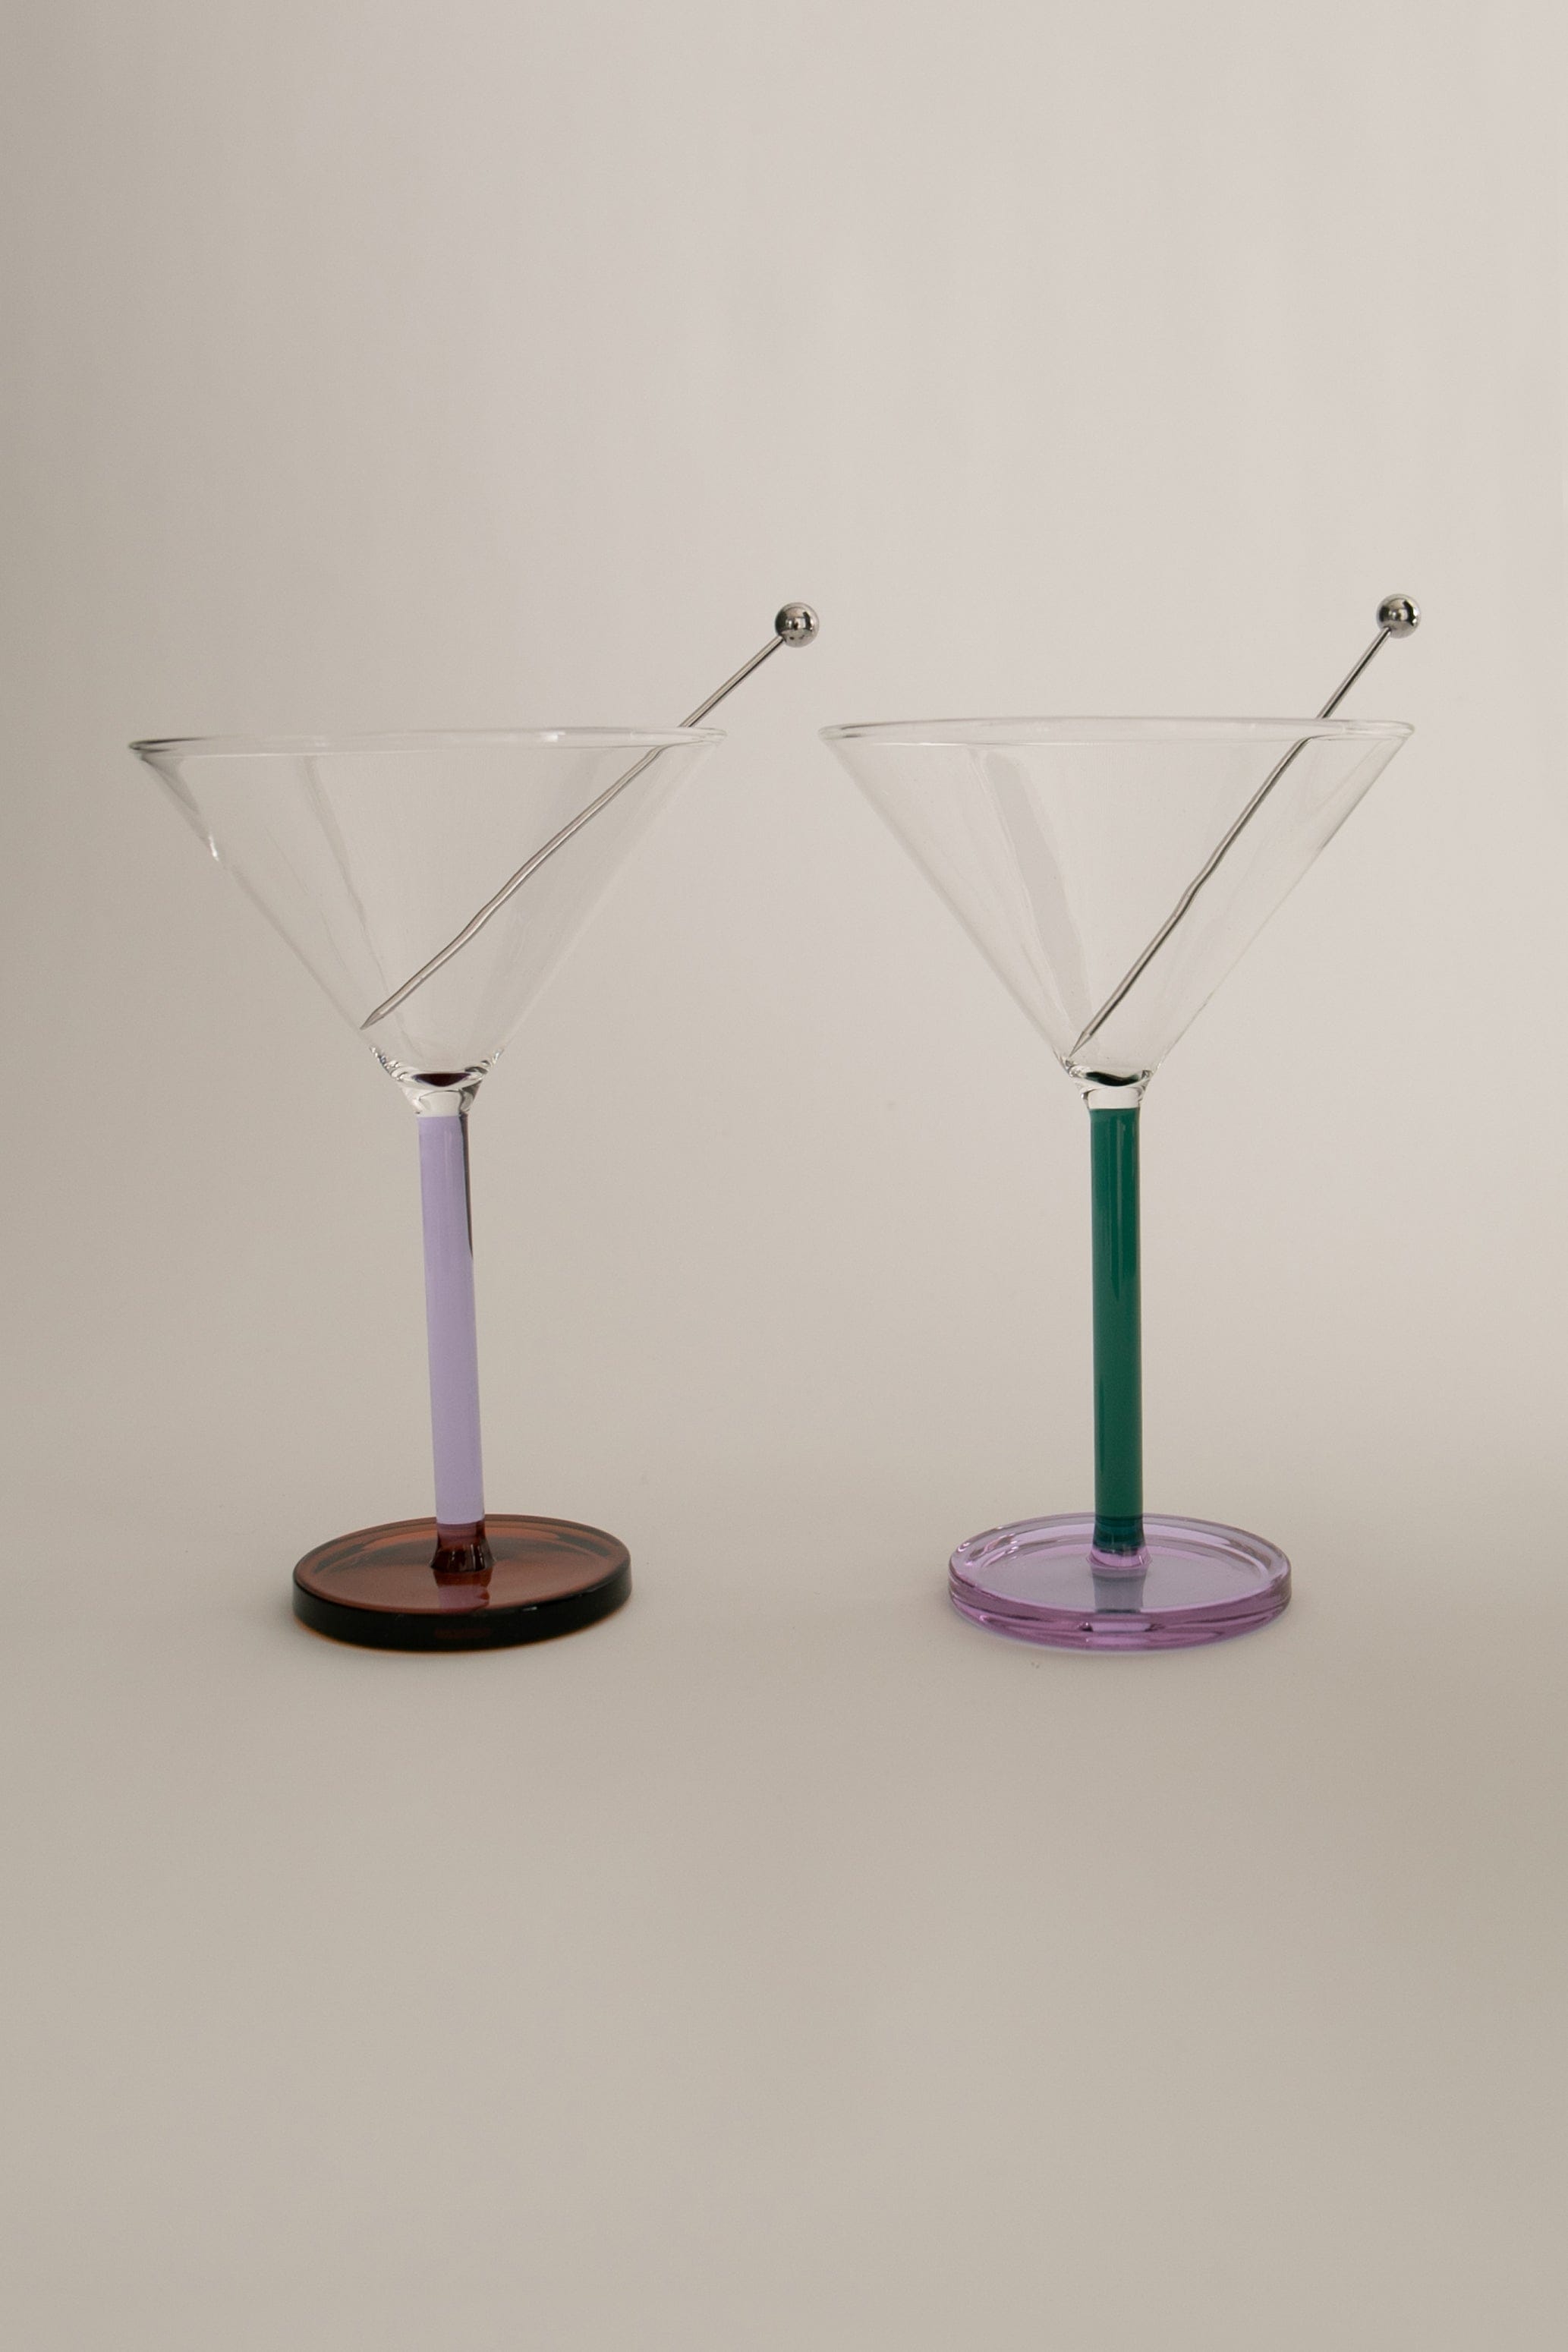 Two Piano Cocktail Glasses with colorful stems, one purple and one green, standing against a neutral background. Each glass features a small, round embellishment at the tip of the stem.